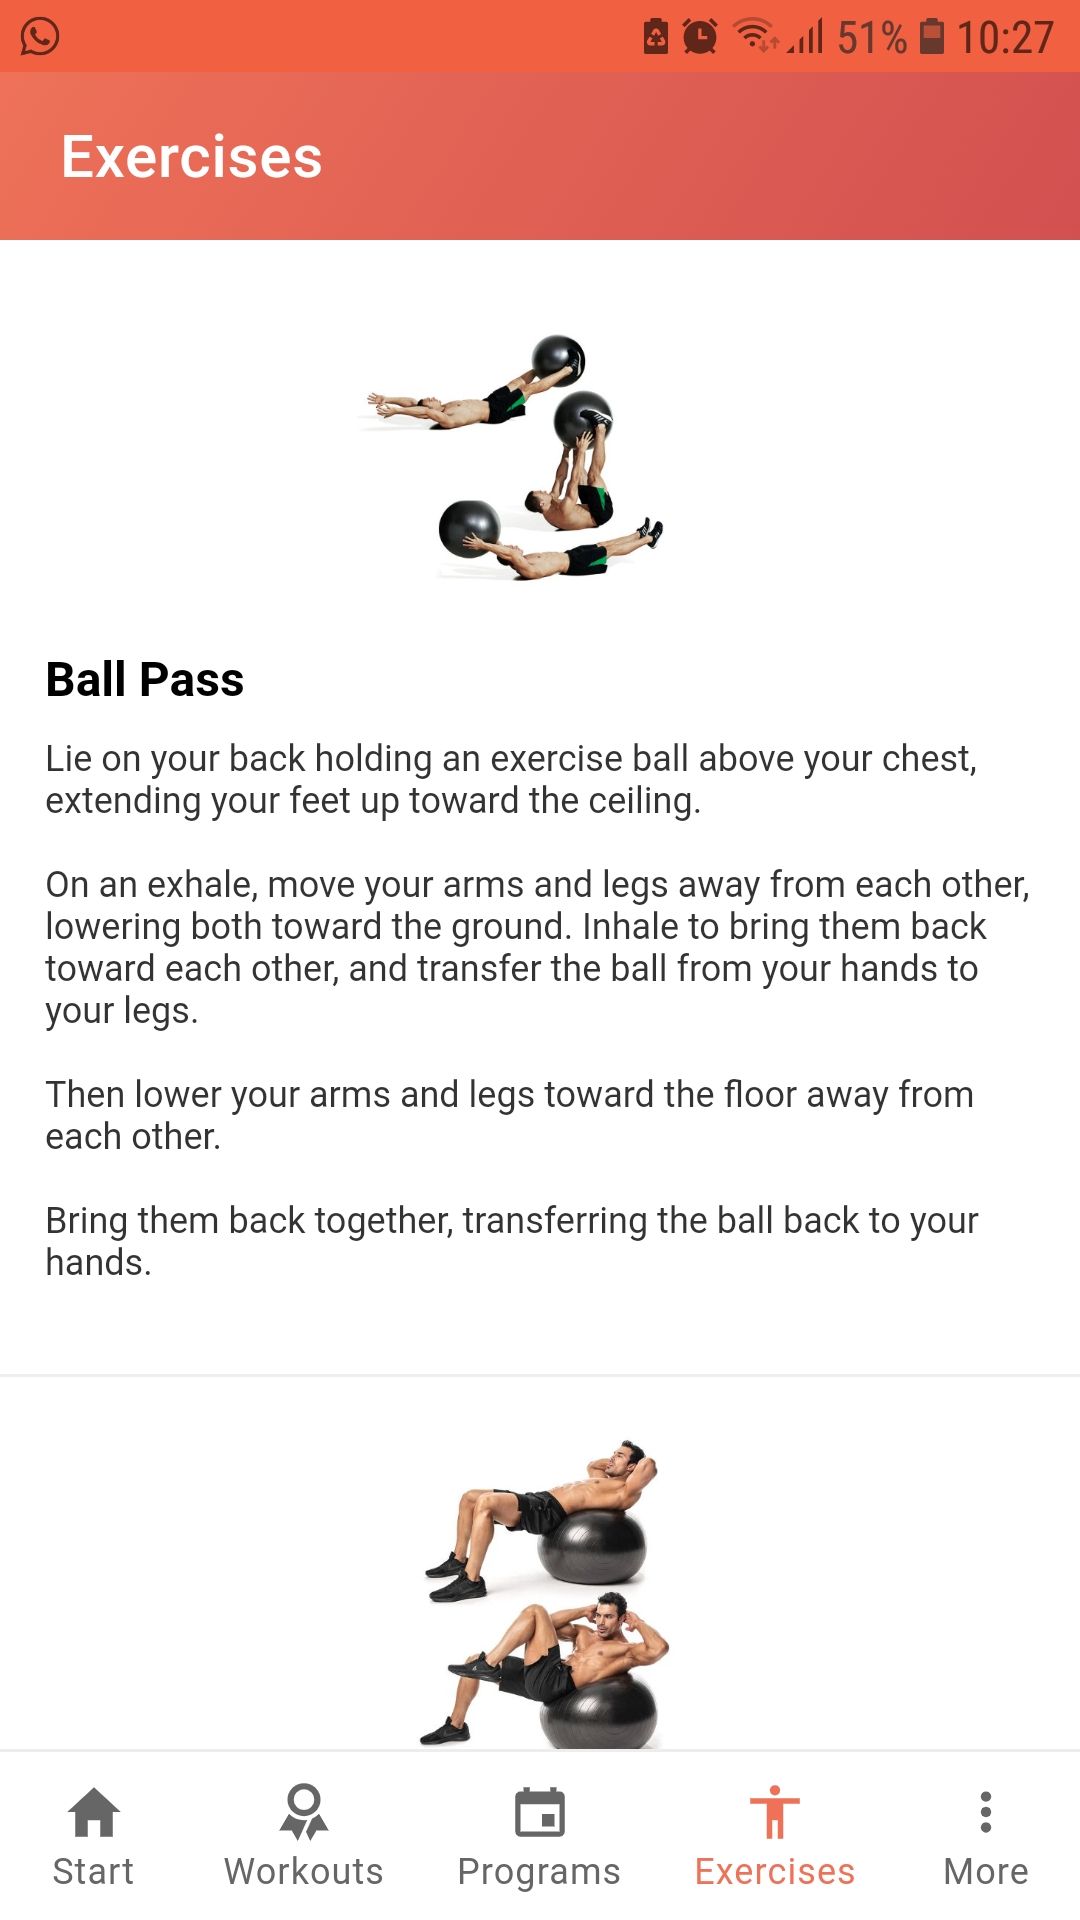 Stay Fit With Samantha Stability Ball Exercises mobile fitness app